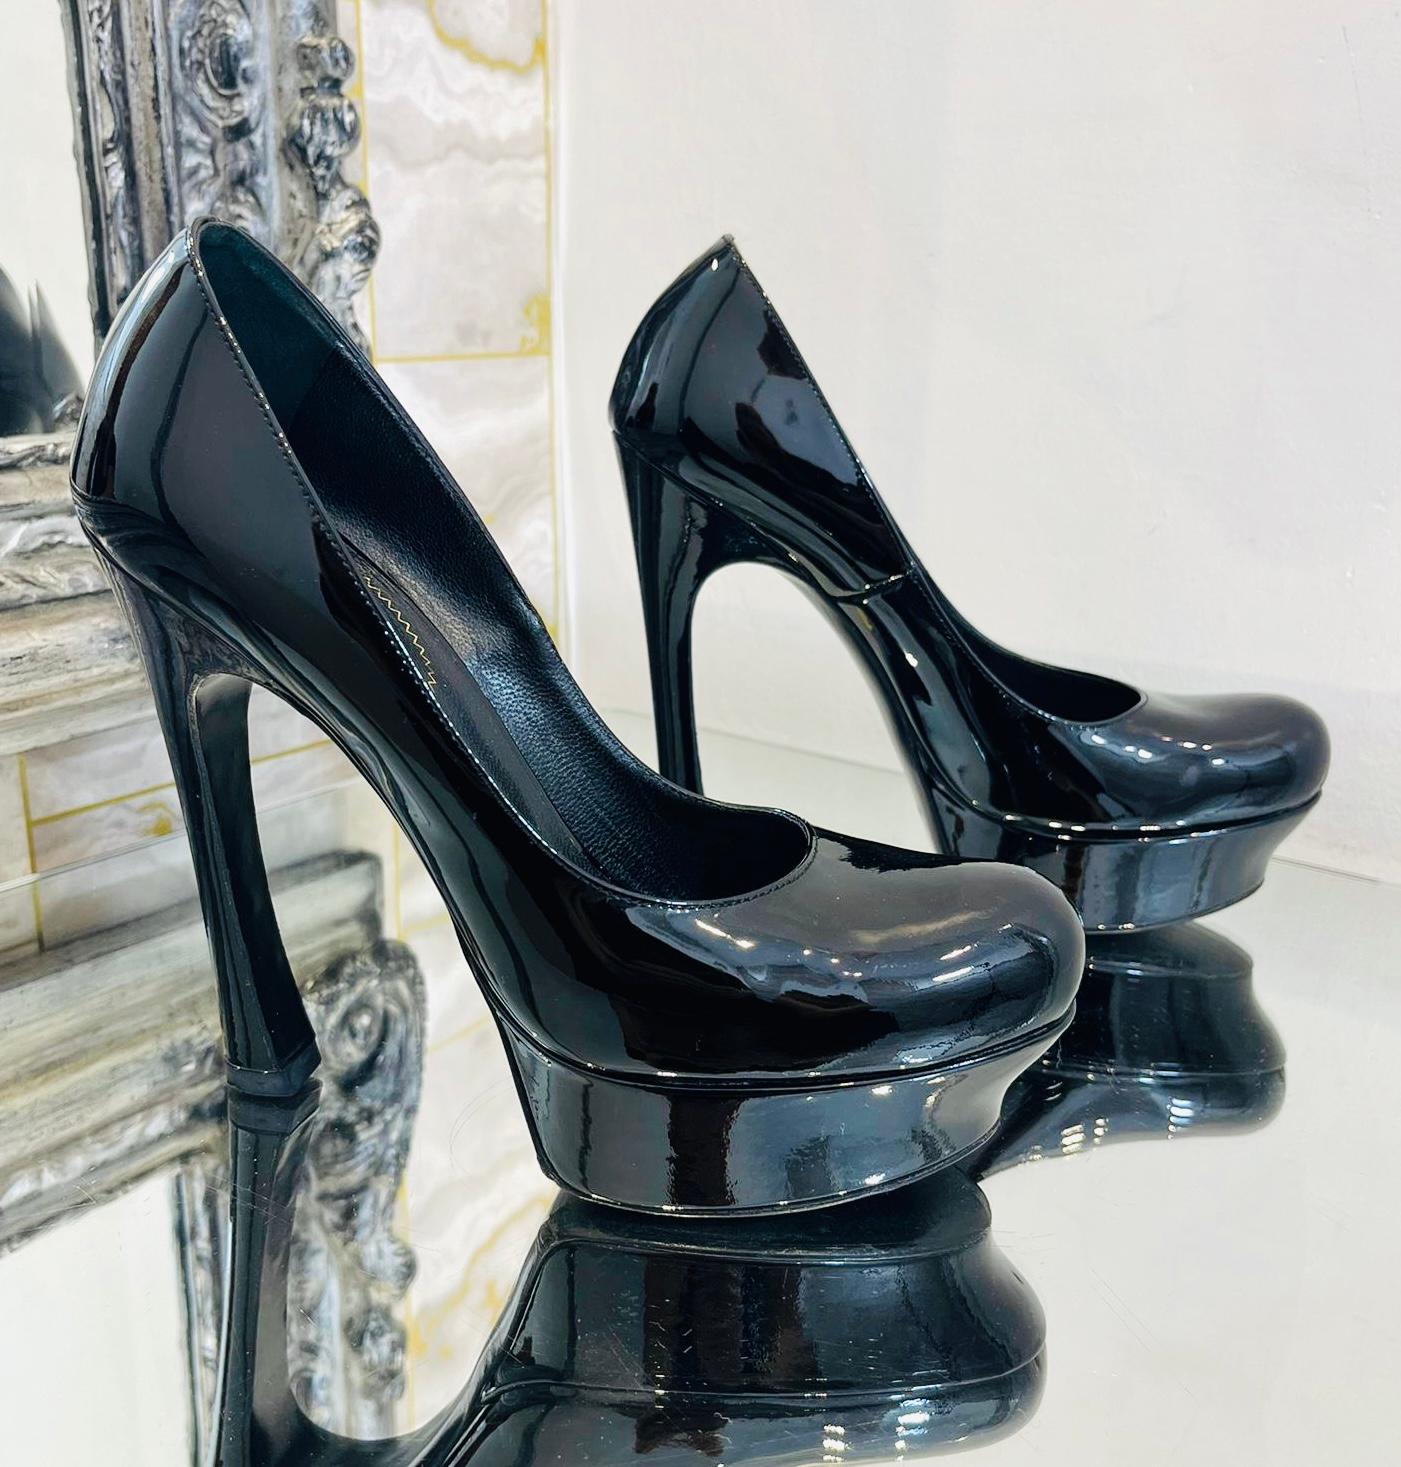 Saint Laurent Tribtoo Patent Leather Pumps In Excellent Condition For Sale In London, GB